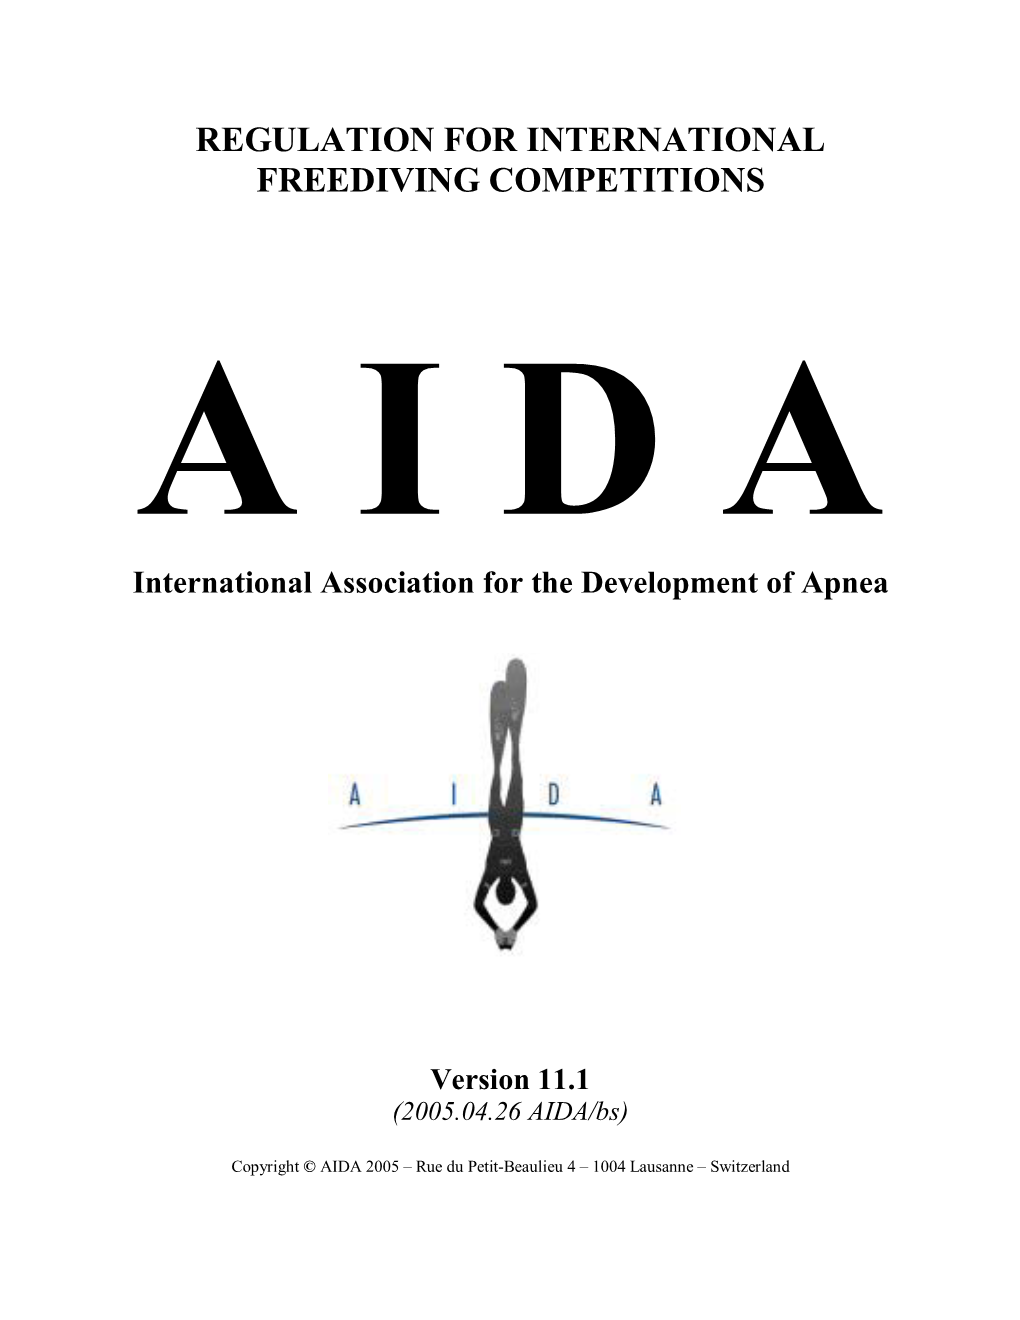 Regulation for International Freediving Competitions